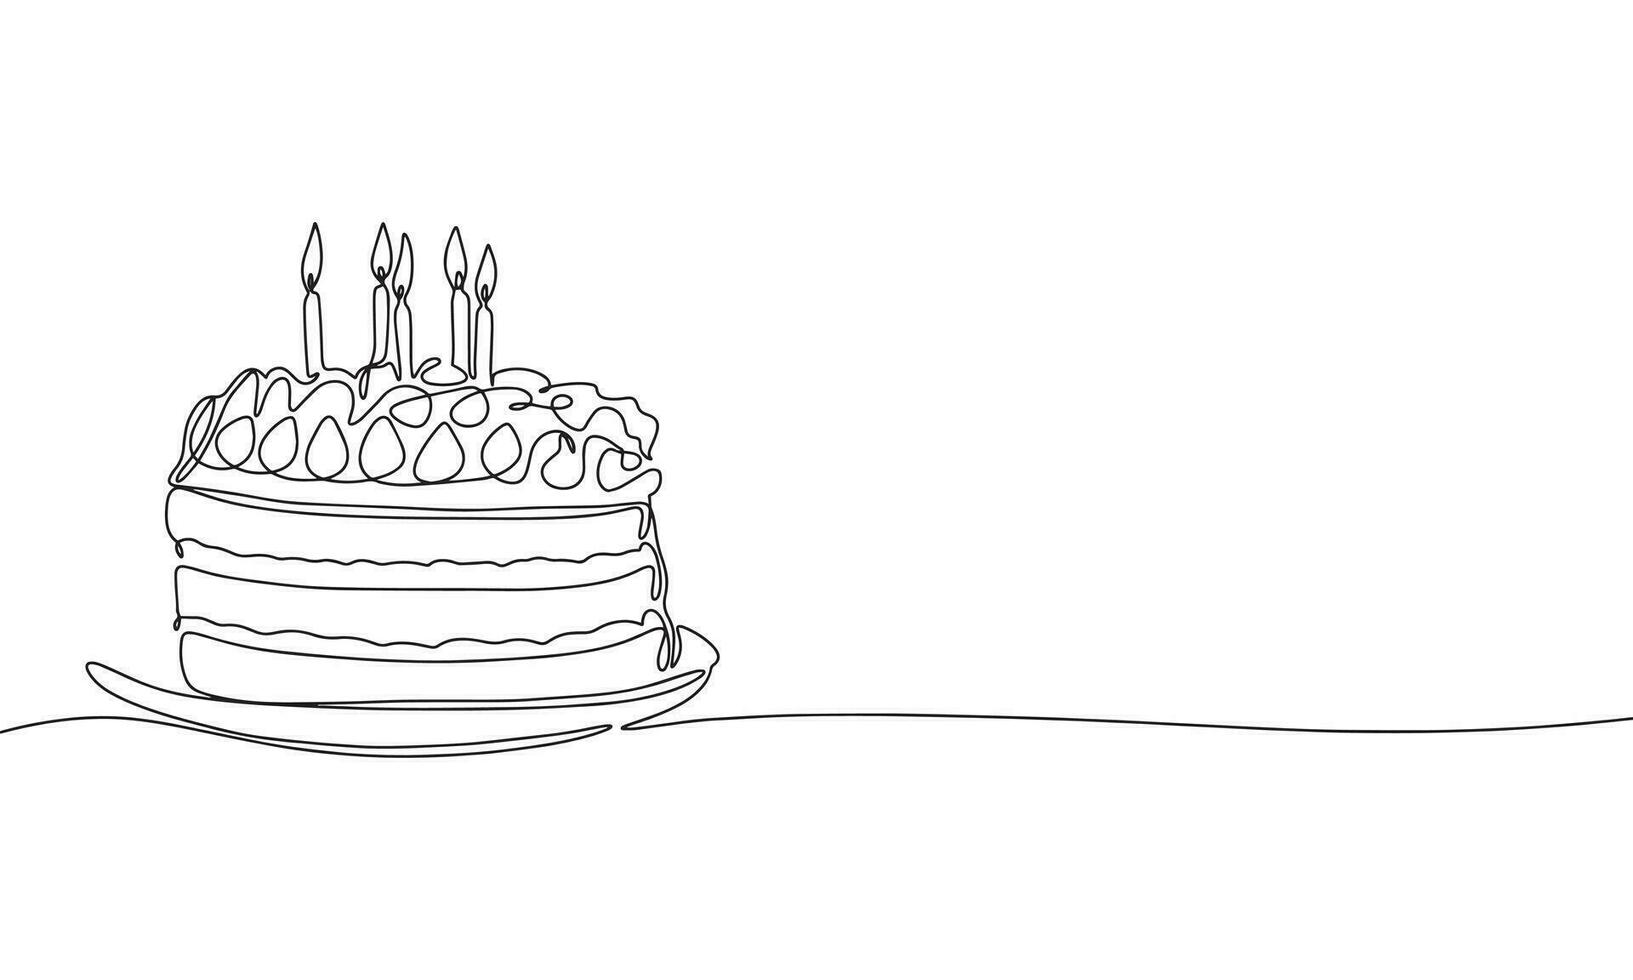 Cake one line continuous. Cake with candles line art. Outline Happy Birthday cake. Vector illustration.